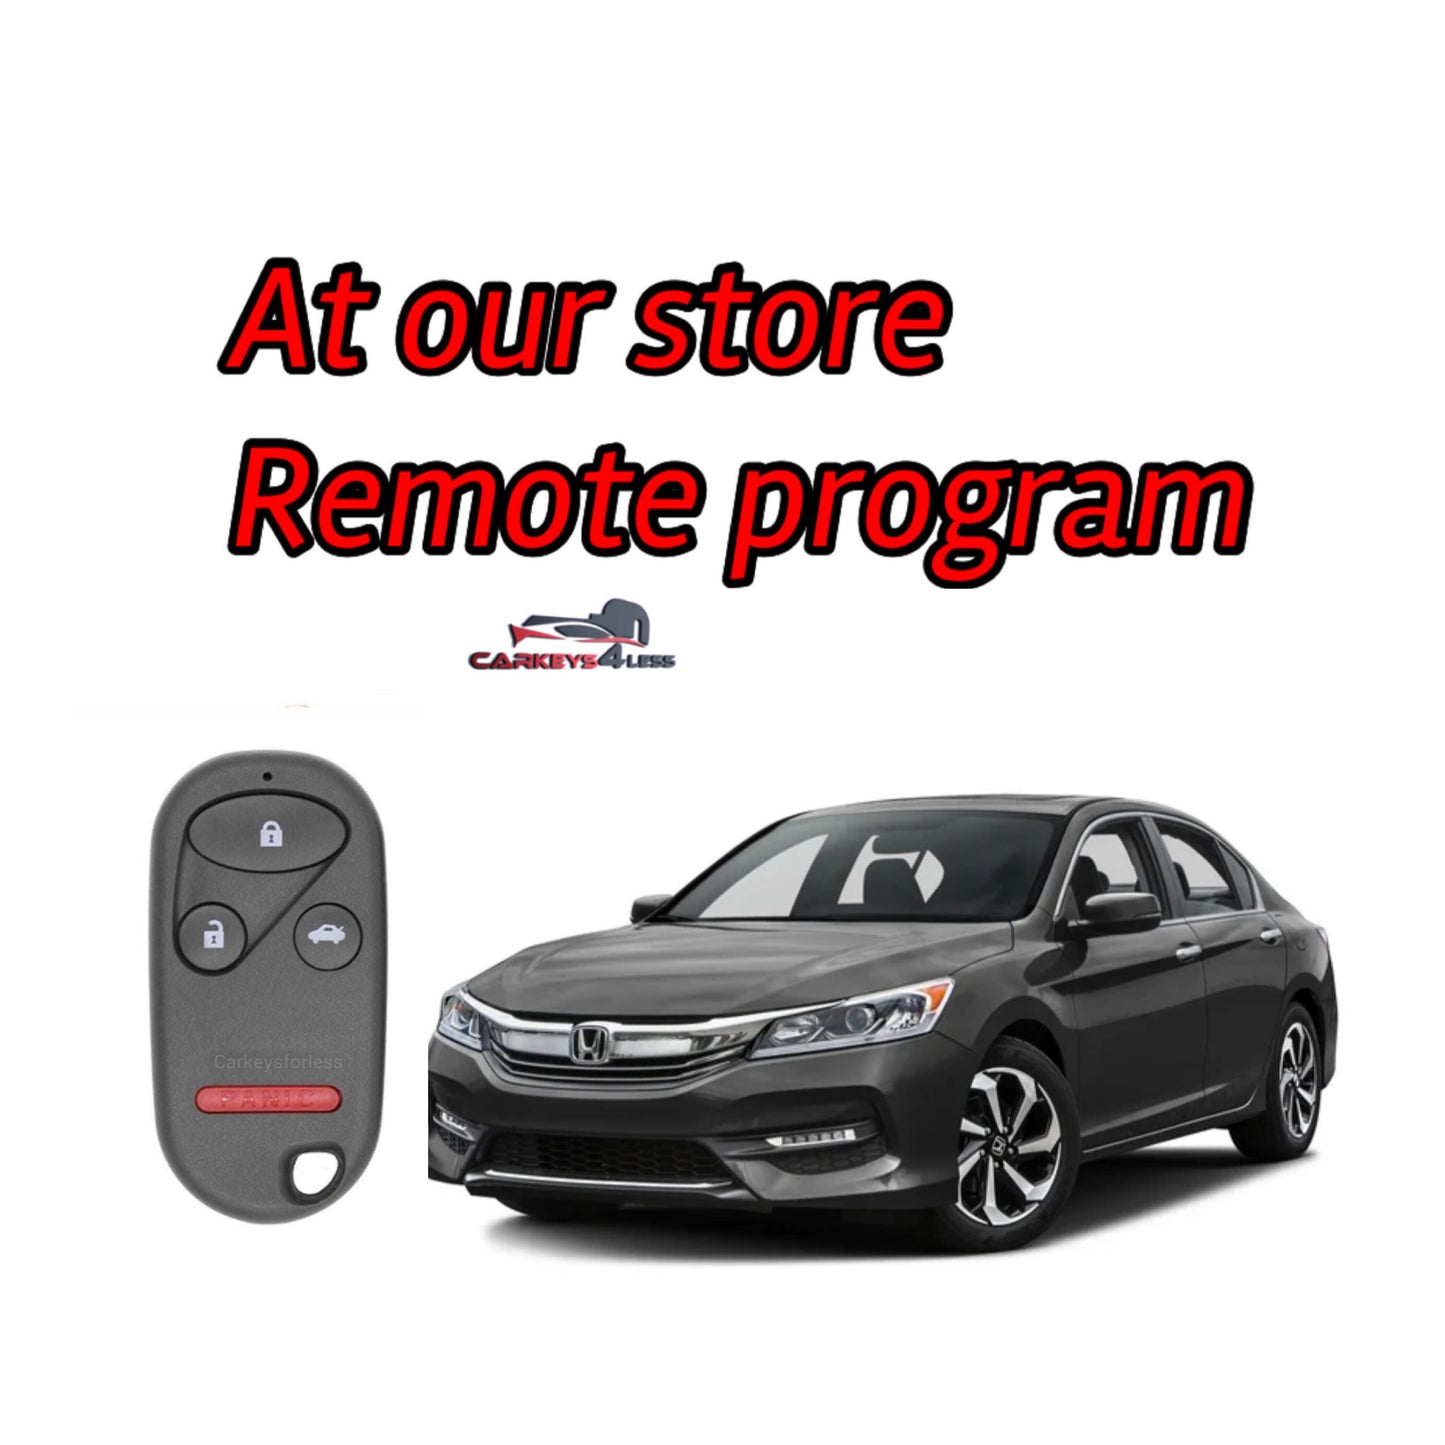 At our store an aftermarket honda remote replacement program